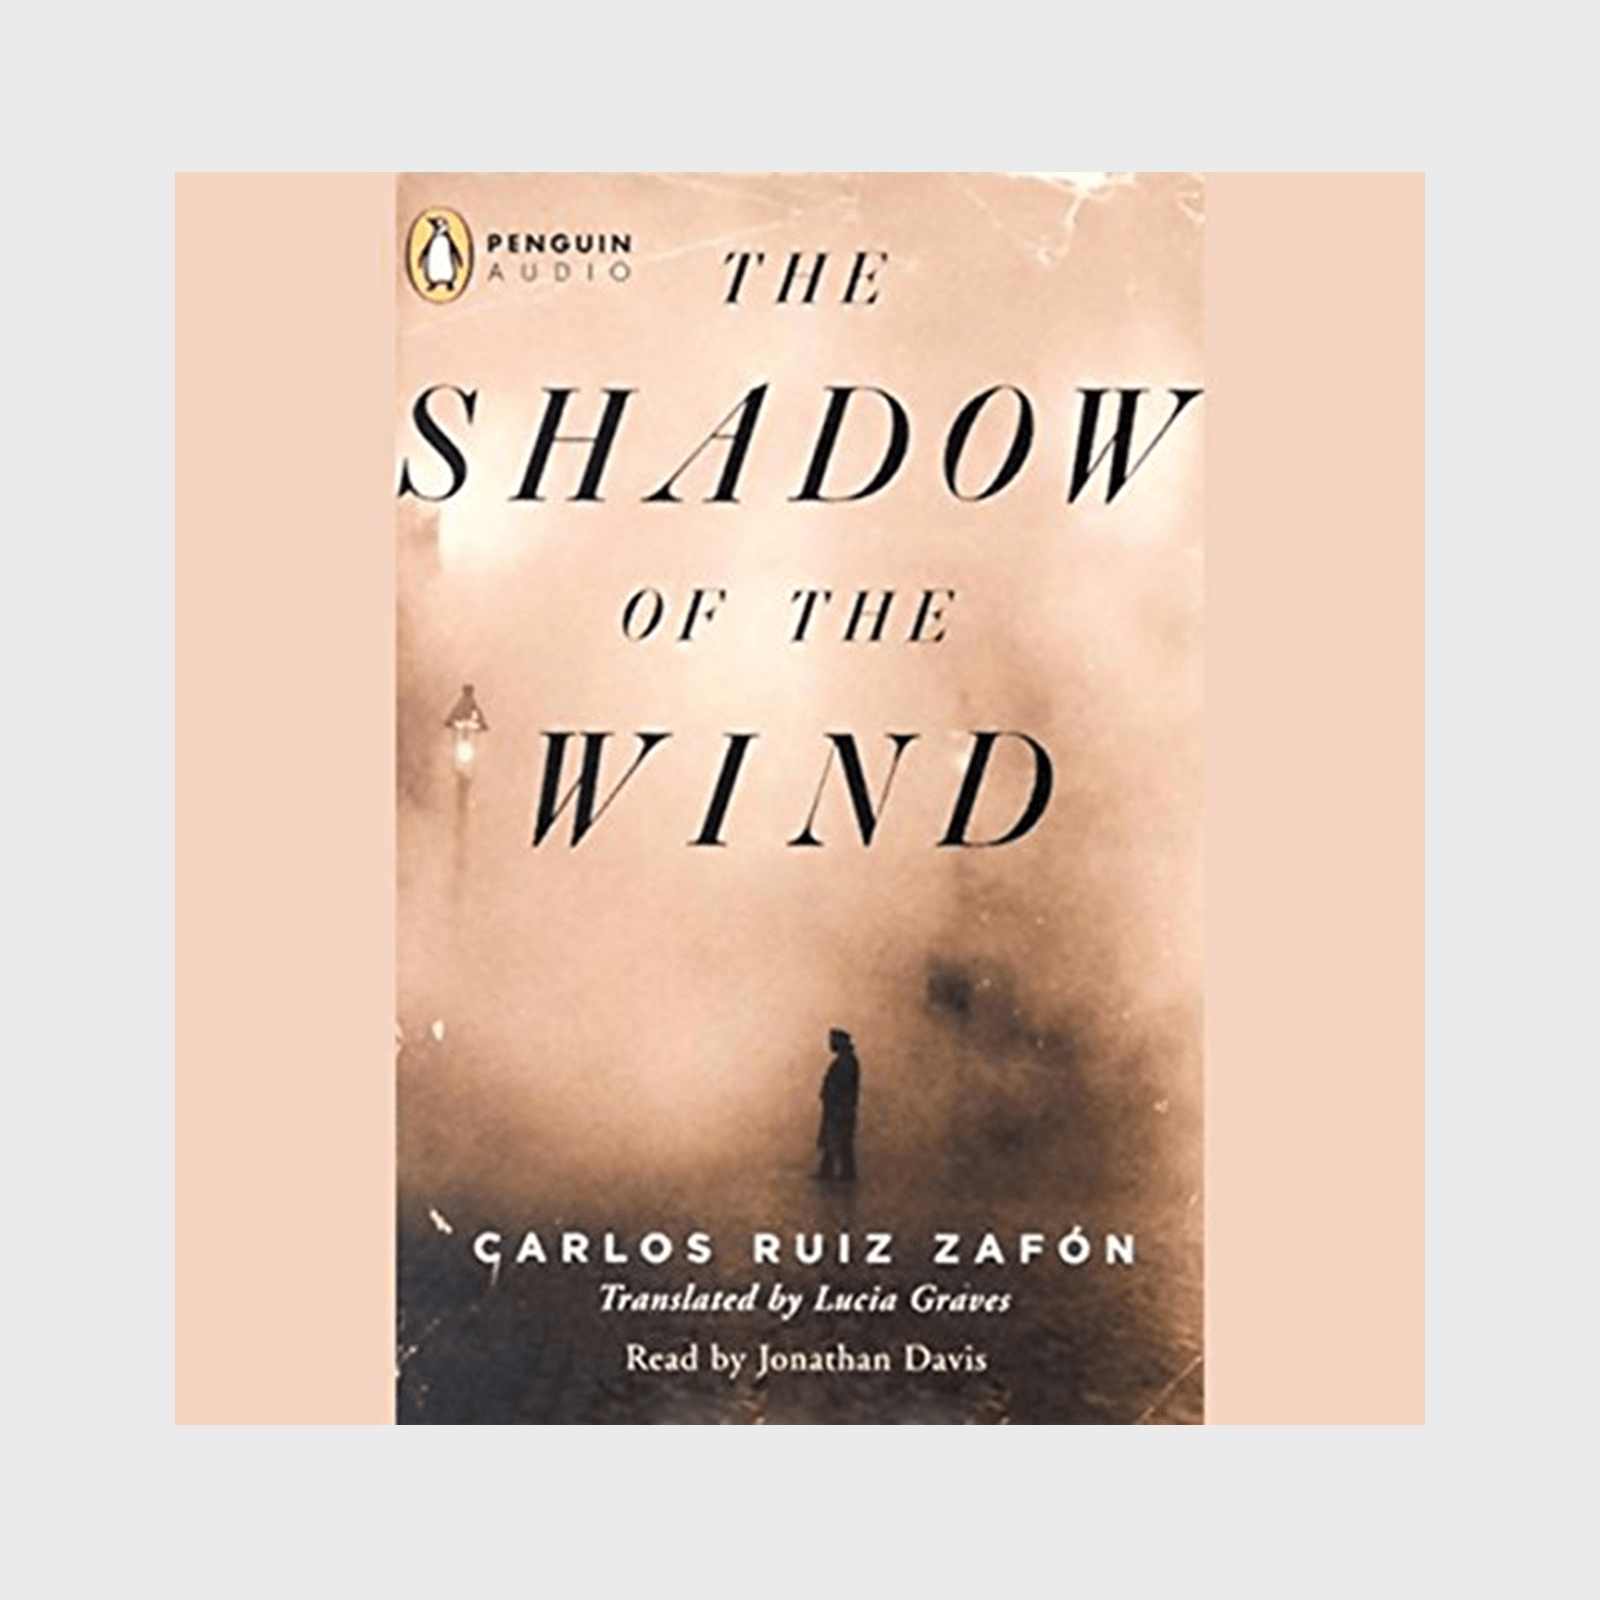 <h3 class=""><strong><em>The Shadow of the Wind</em> by Carlos Ruiz Zafon</strong></h3> <p>If you love <a href="https://www.rd.com/list/mystery-books/" rel="noopener noreferrer">mystery books</a>, listen to this gripping historical entry set in 1945 Barcelona. When Daniel is 11 years old, his father, an antiquarian book dealer, initiates him into the Cemetery of Forgotten Books, a secret library guarded by the city's guild of rare-book dealers as a place for books forgotten by the world. Daniel falls in love with a book titled <a href="https://www.amazon.com/The-Shadow-of-Wind-audiobook/dp/B0009MZ7F2" rel="noopener noreferrer"><em>The Shadow of the Wind</em></a> by an author named Julian Carax. When Daniel sets out to read other works by the long-dead Carax, he discovers that someone has been destroying them. But who? And why? This beautifully written story is filled with mystery, love, and a reminder of how powerful books can truly be.</p> <p class="listicle-page__cta-button-shop"><a class="shop-btn" href="https://www.amazon.com/The-Shadow-of-Wind-audiobook/dp/B0009MZ7F2">Shop Now</a></p>